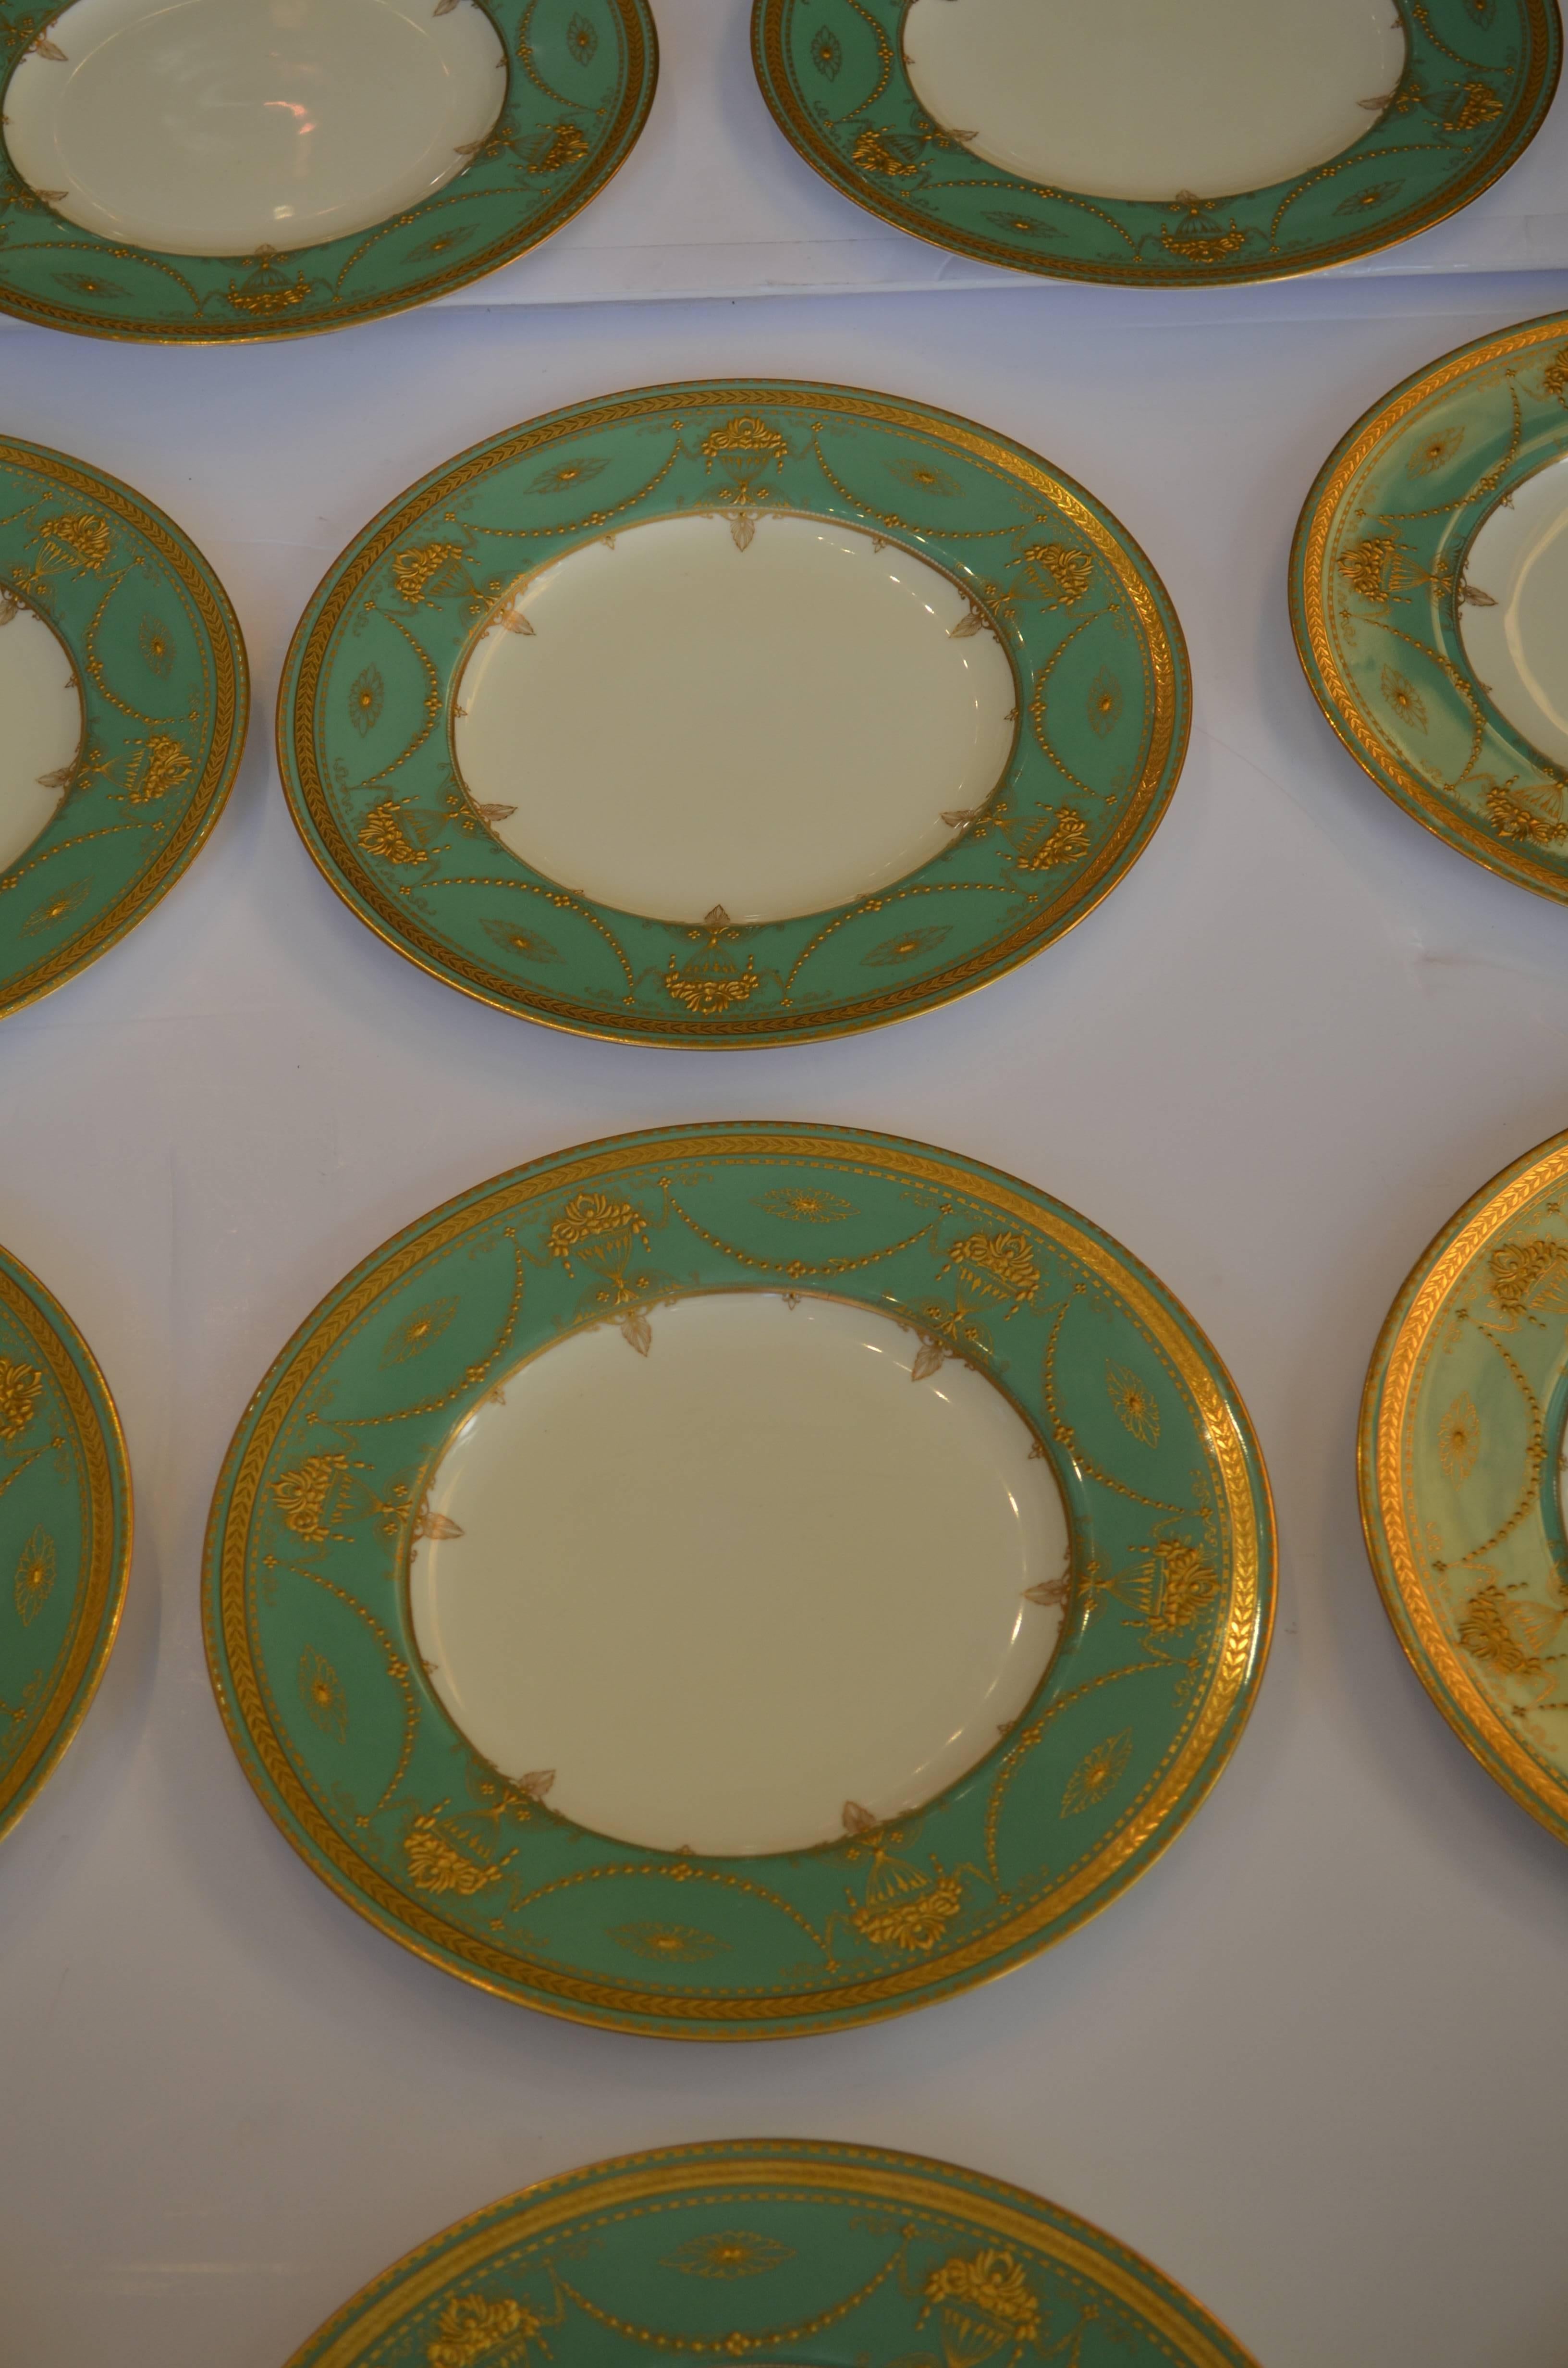 Opulent set of 11 gilded age gold rimmed dinner plates,
with a wide emerald green border. hand-painted raised gold,
gilt detailing featuring neoclassic urns and swag motifs.
The set was retailed by Richard Boggs in Boston.
Perfect for Christmas or